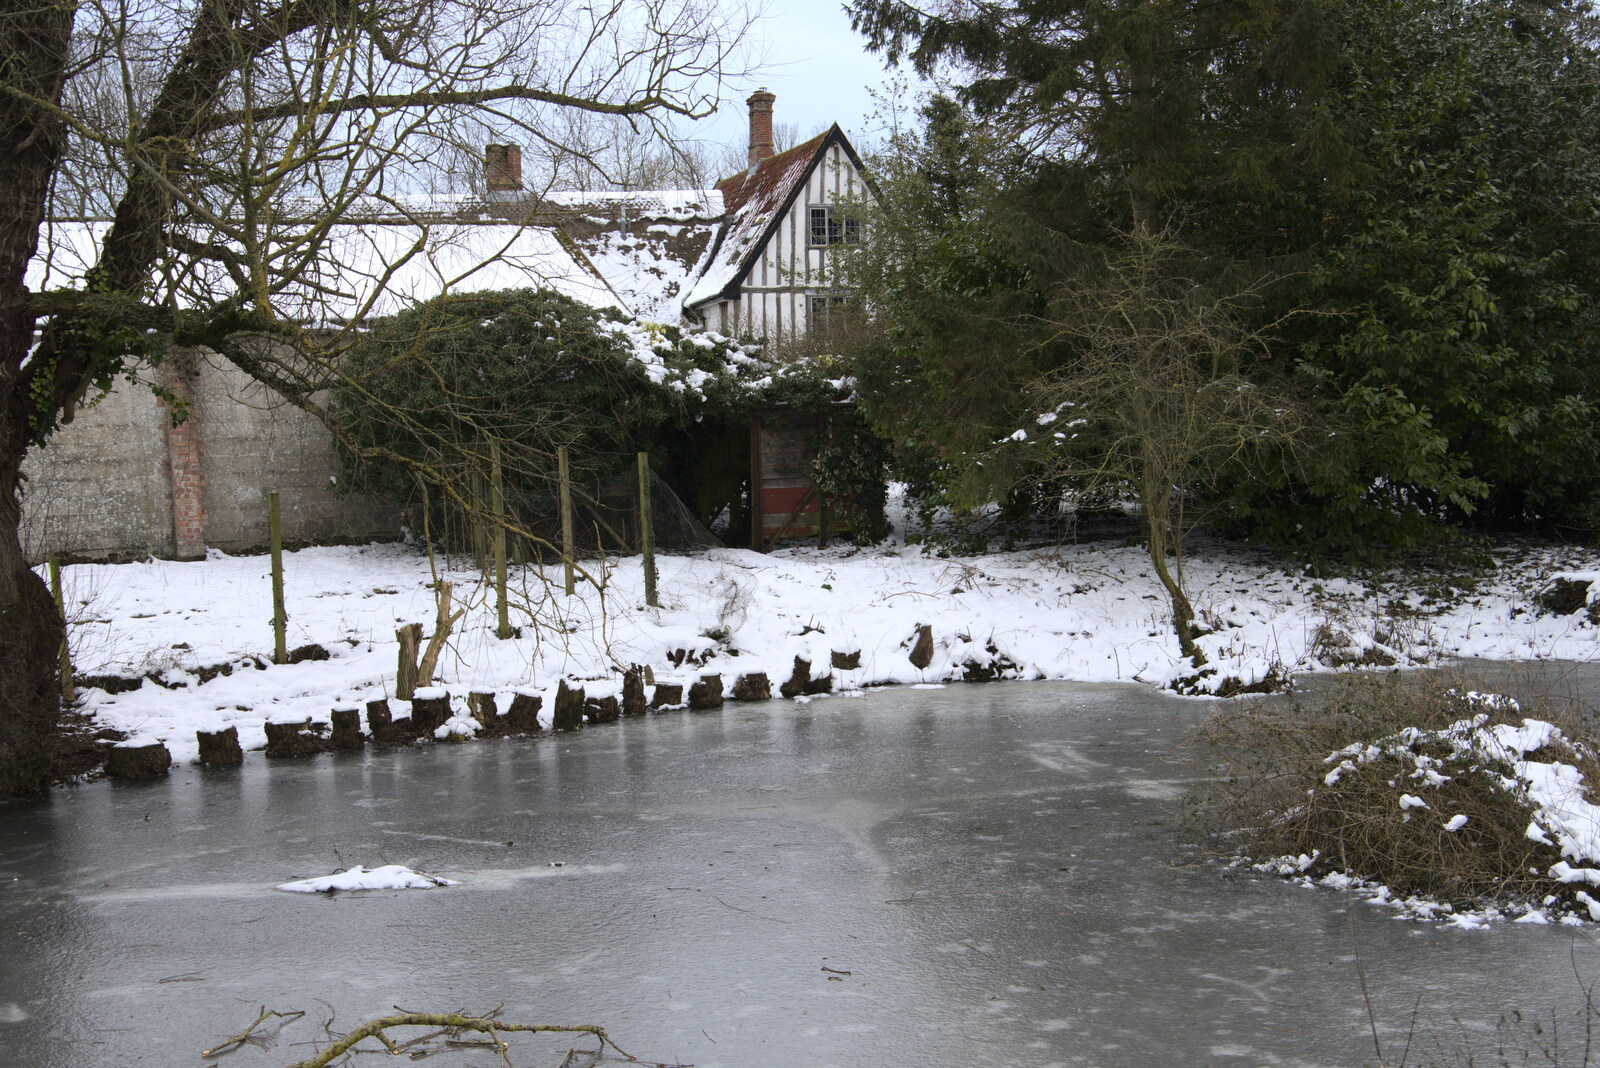 A frozen pond in Brome from Derelict Infants School and Ice Sculptures, Diss and Palgrave, Norfolk and Suffolk - 13th February 2021